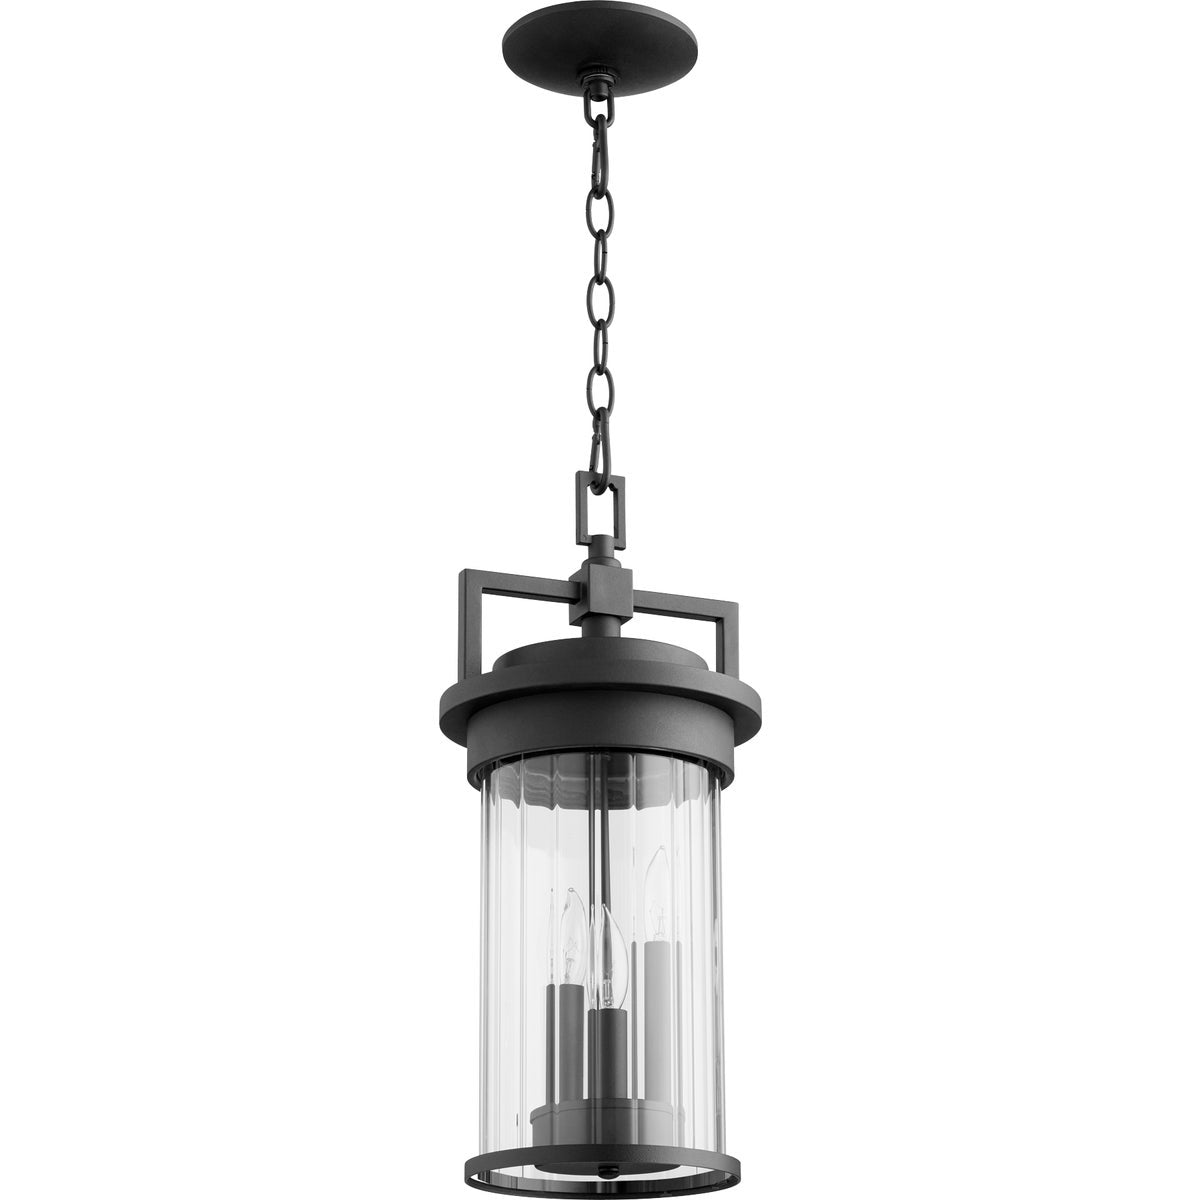 Contemporary Outdoor Hanging Light with clear glass shade, crafted from durable metal. Drum-shaped silhouette with clean lines. Wet location rated. 40W, 120V, 3 bulbs (not included). Candelabra E12 base. Dimmable. UL Listed. 8"W x 18.25"H. 2-year warranty.